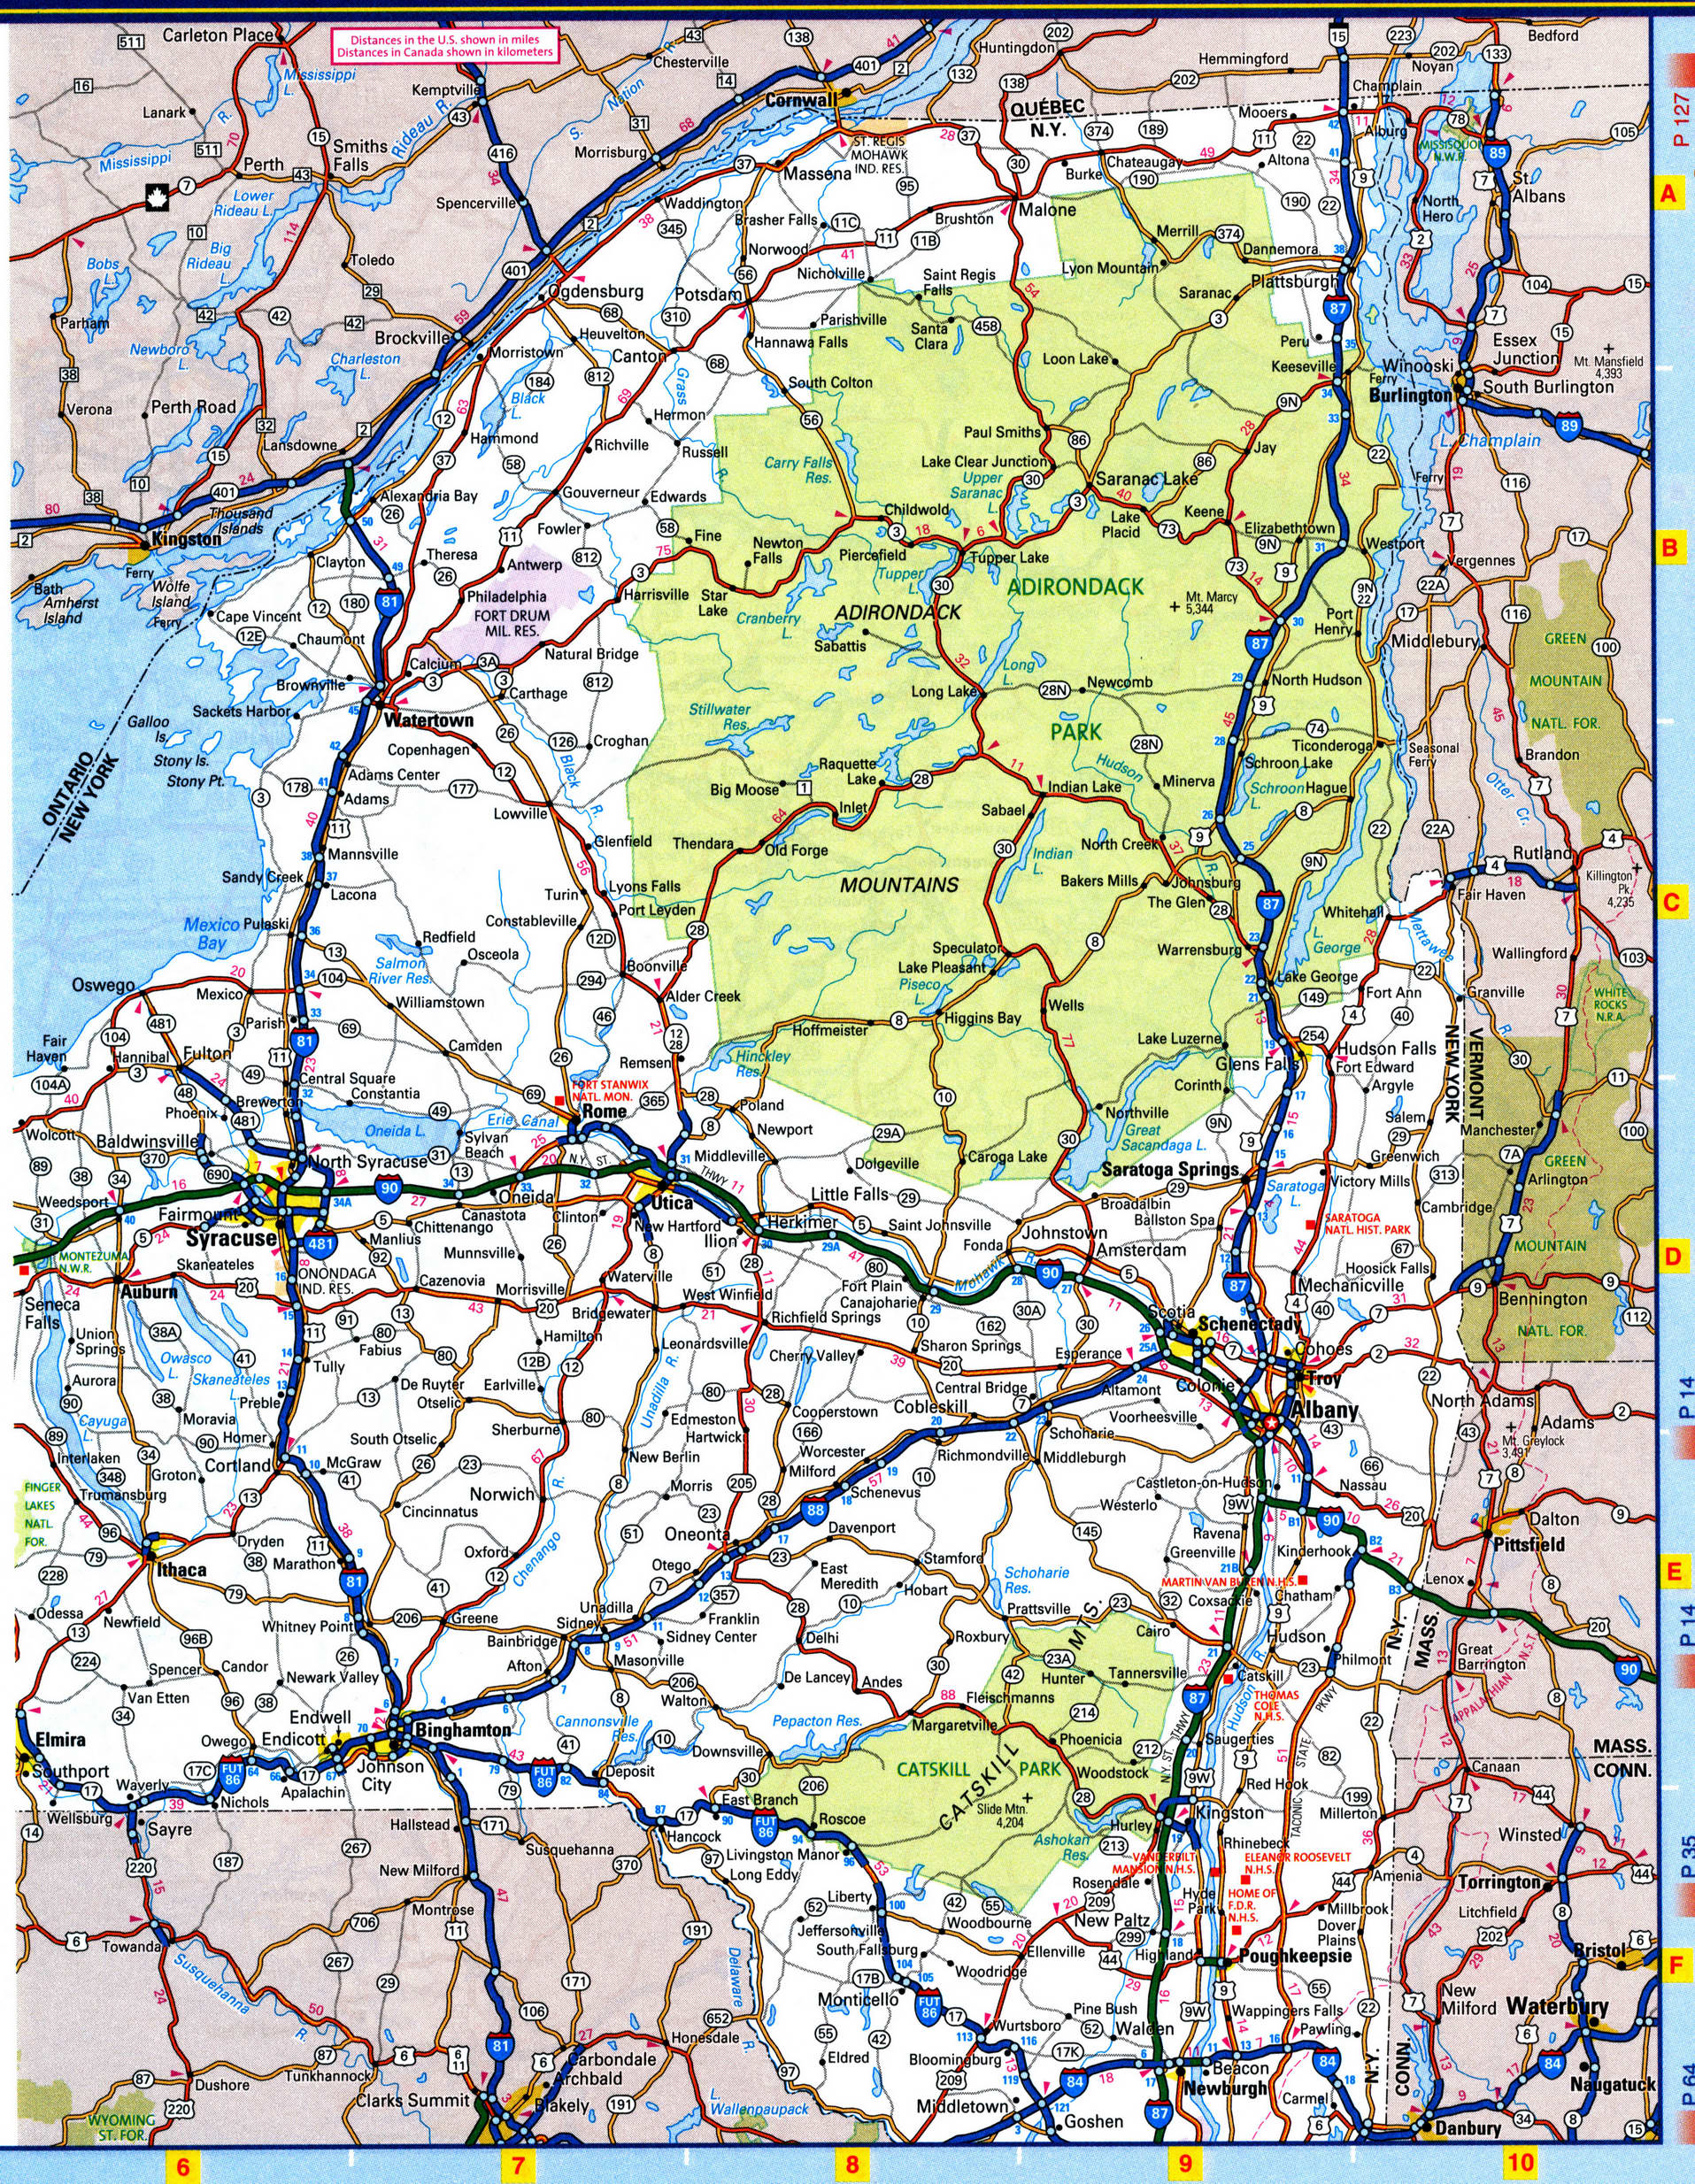 New York state highway road map